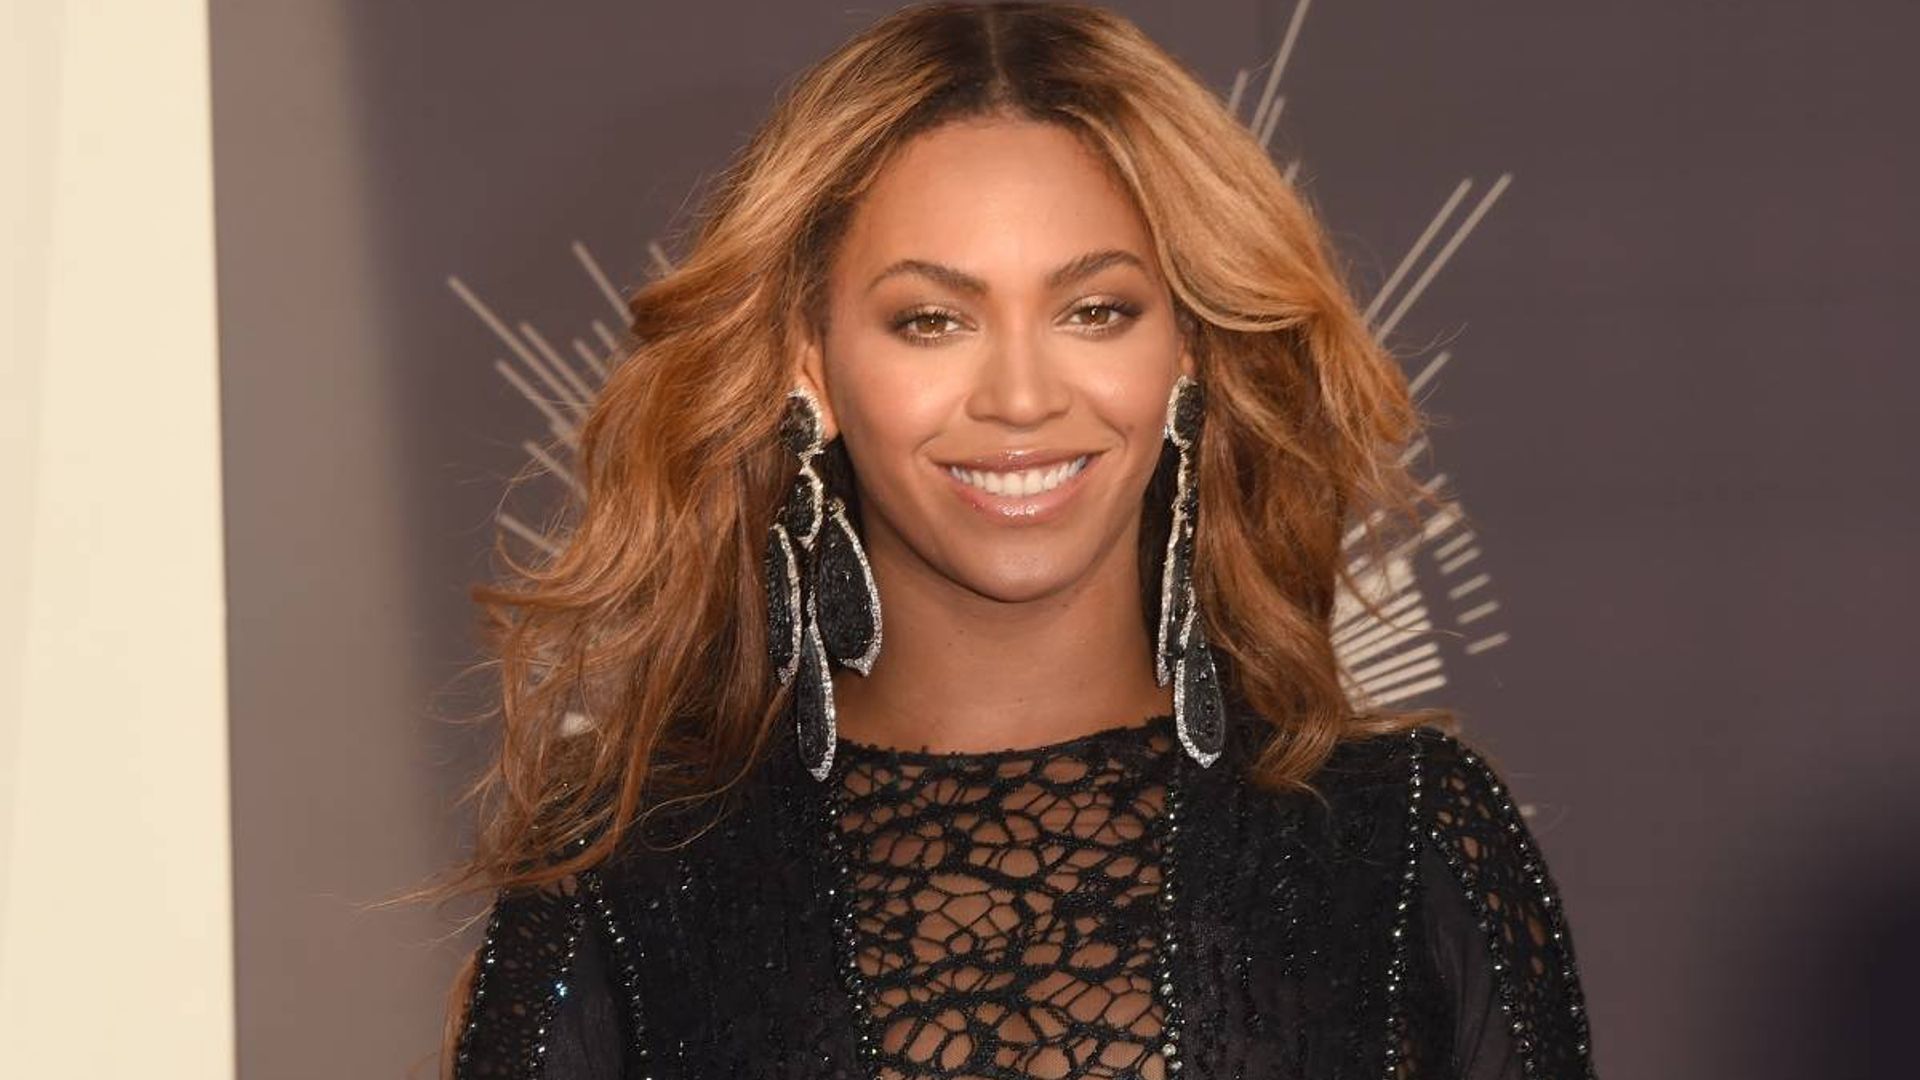 Beyoncé’s stunning metallic pants will leave you breathless - and we found the best dupe